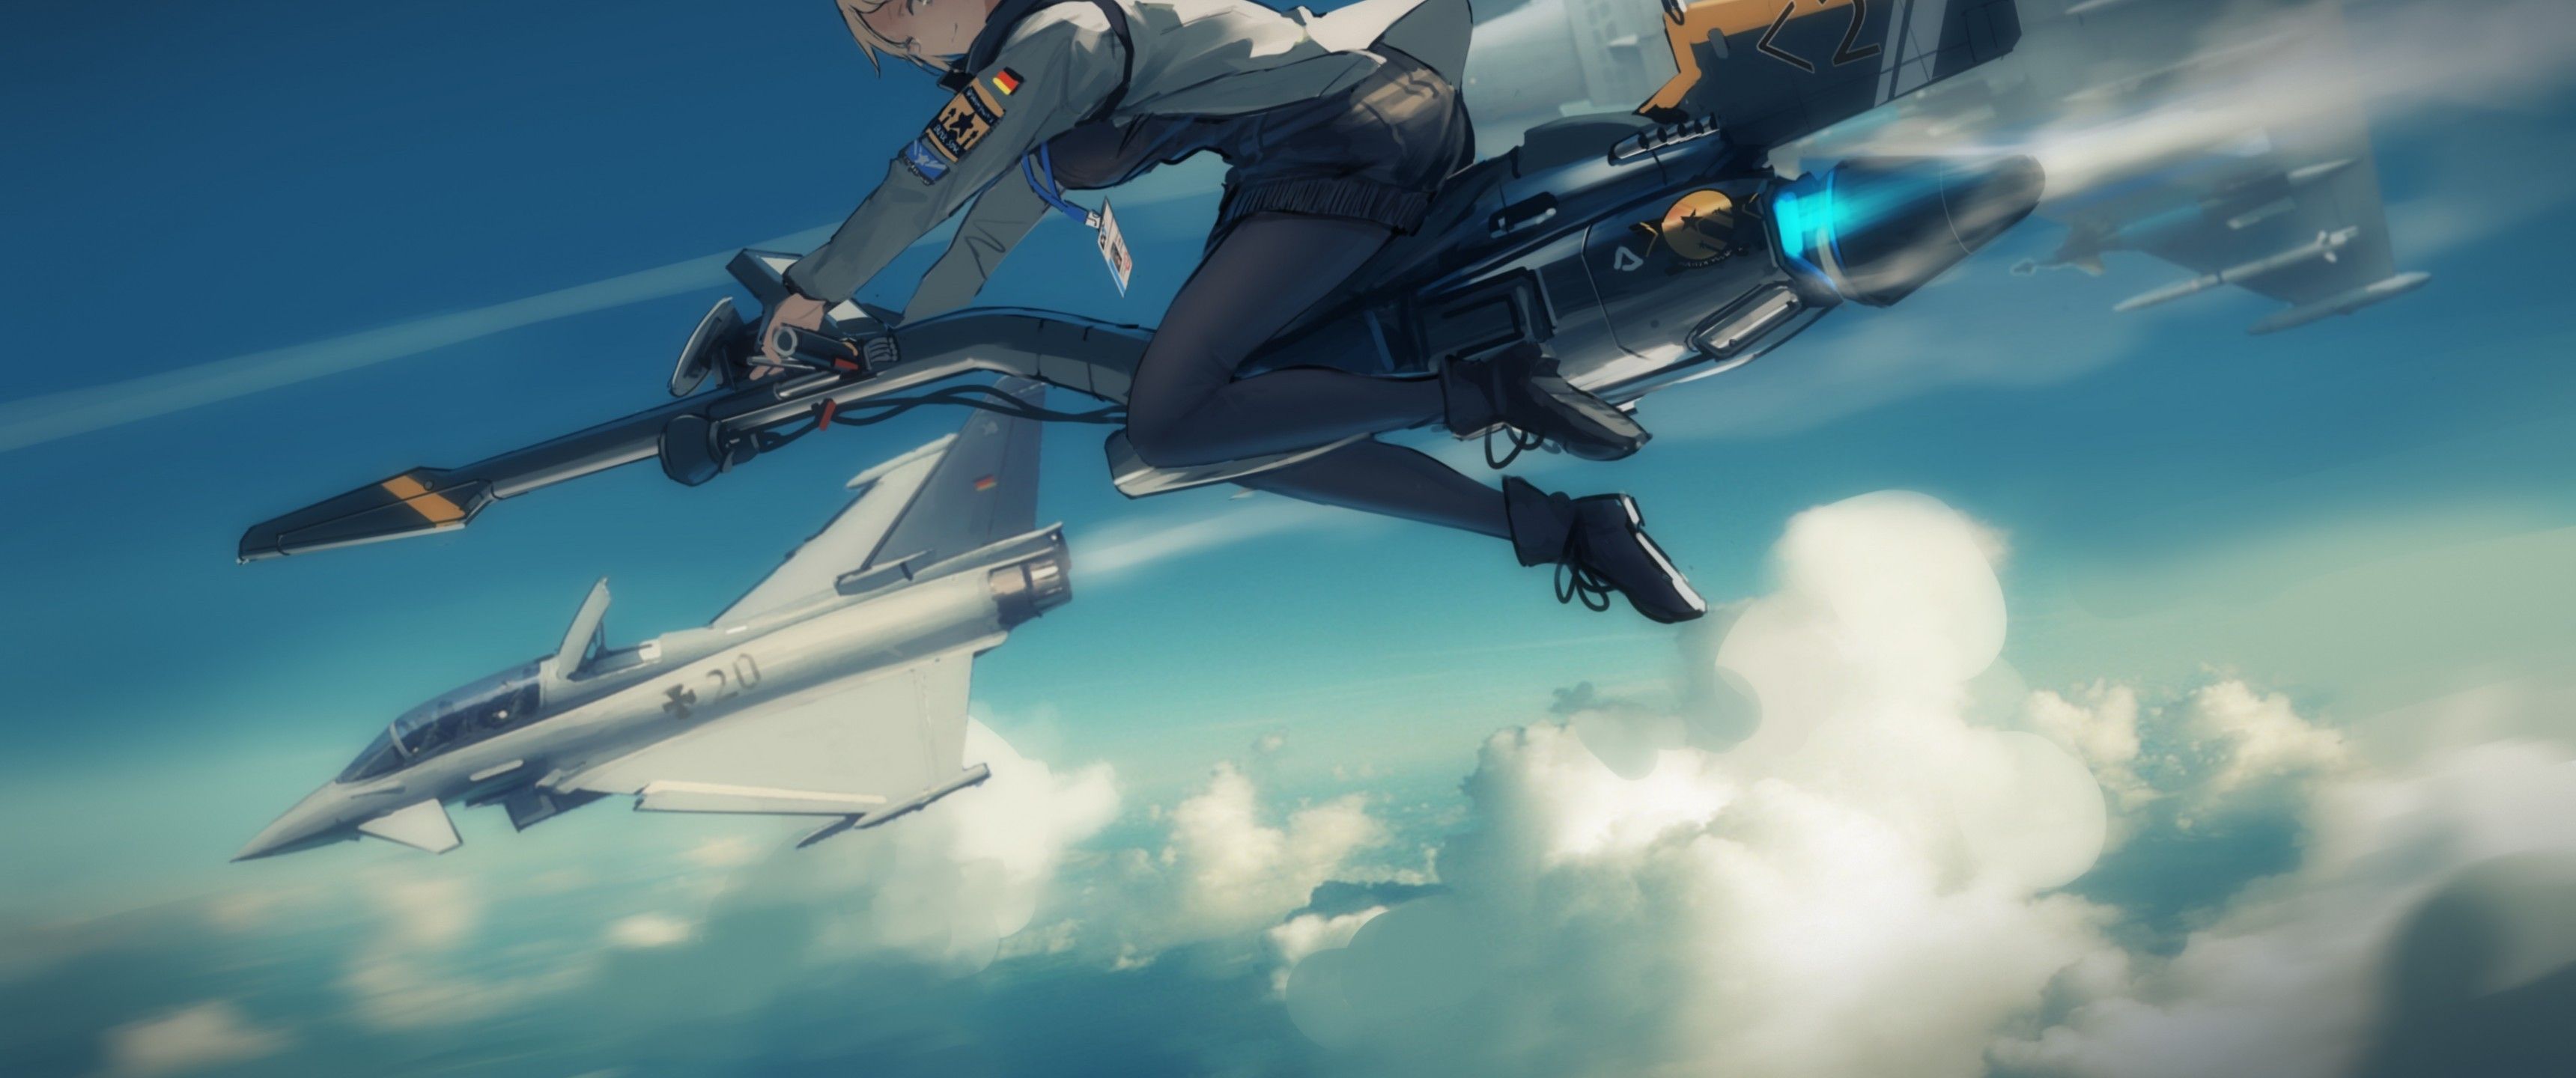 Download 3440x1440 Anime Girl, Sci Fi, Flying, Blonde, Clouds Wallpaper